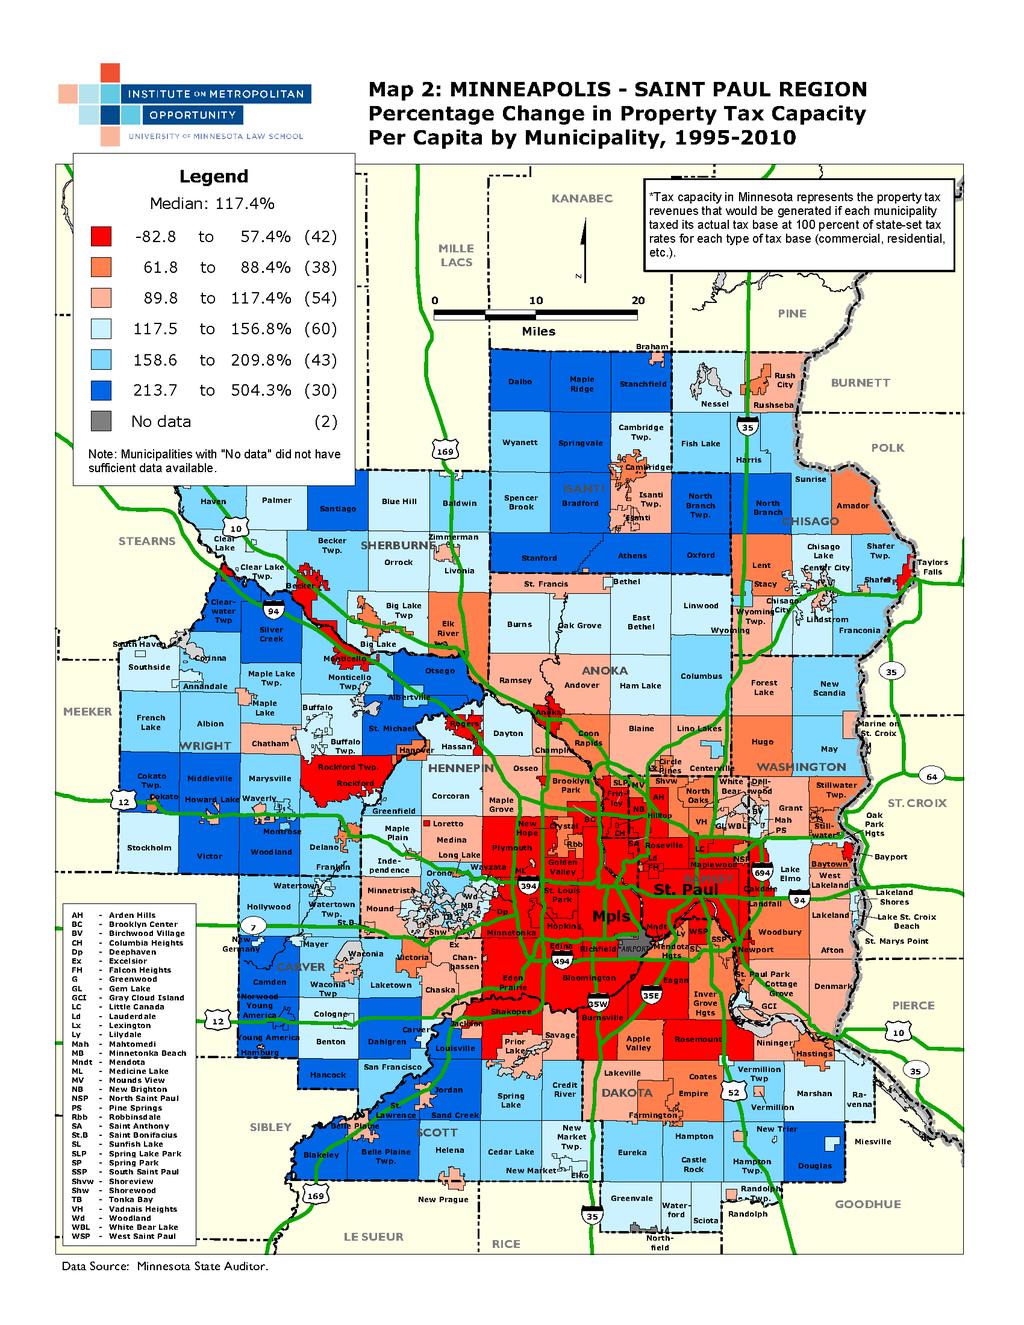 Housing Policy Report of the Twin Cities